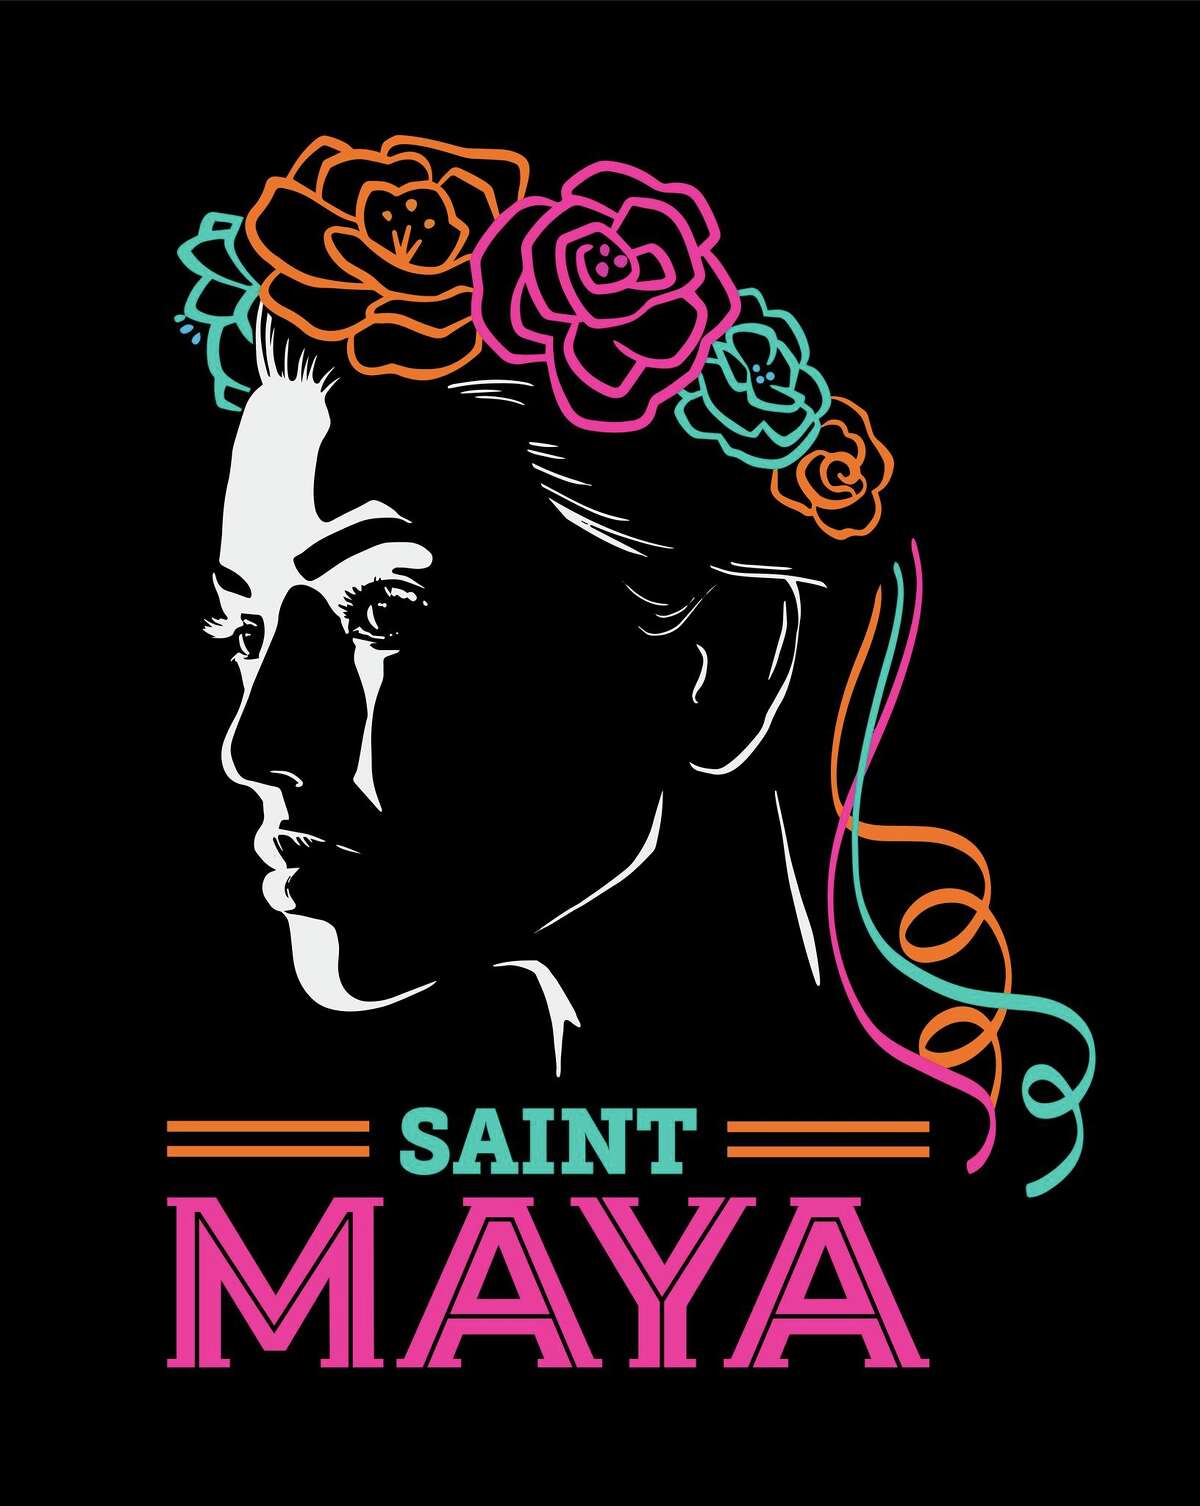 Two years later, a tequila-loving trio of local entrepreneurs were able to see their product, "Saint Maya," a blanco inspired by San Antonio, on liquor store shelves.  But not for long, the perfectly San Antonio-branded bottles of the booze sold out in the first day last weekend. Co-founder Zacharee Ramirez said LiquorMax as well as all Alamo City Liquors locations will be restocked with the tequila he and Jordan Simmons and Jay Torrez brought to life. 